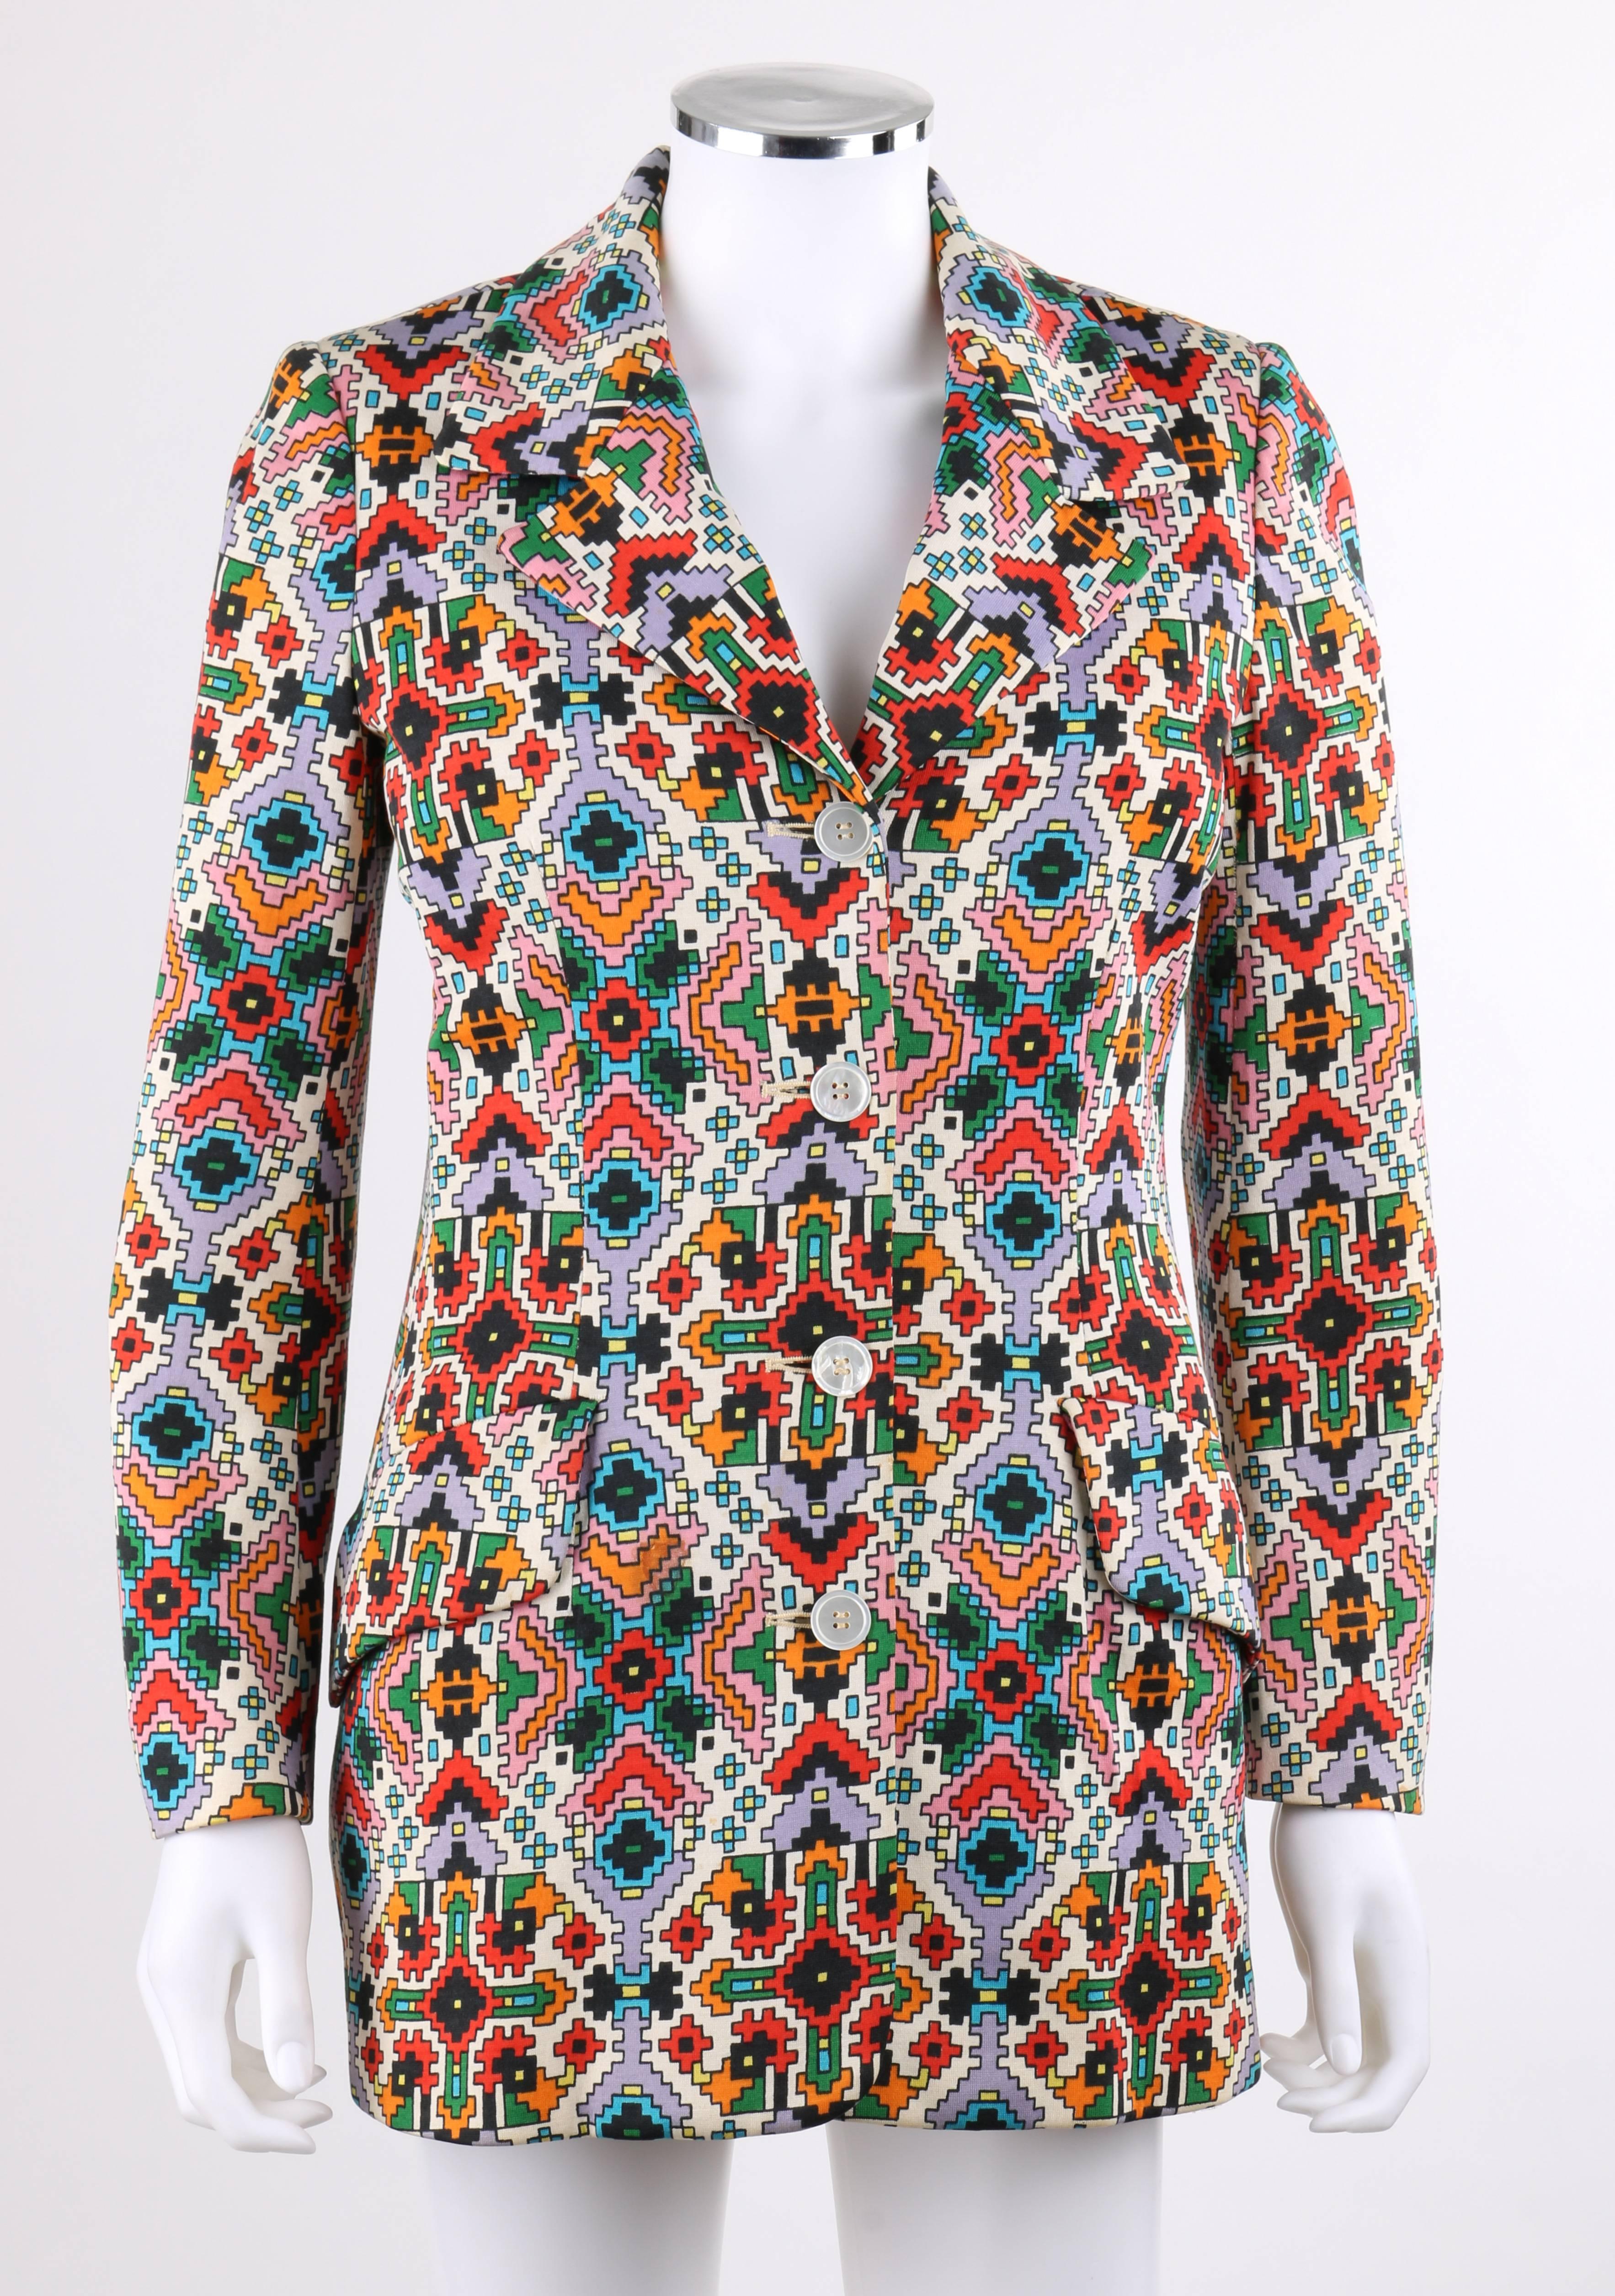 Beene Bazaar c.1970's notched lapel collar knit blazer with an all over geometric pixel kaleidoscope print on off white in shades of red, orange, green, yellow, black, blue, and purple. Designed by Geoffrey Beene. Long sleeves with three buttons at